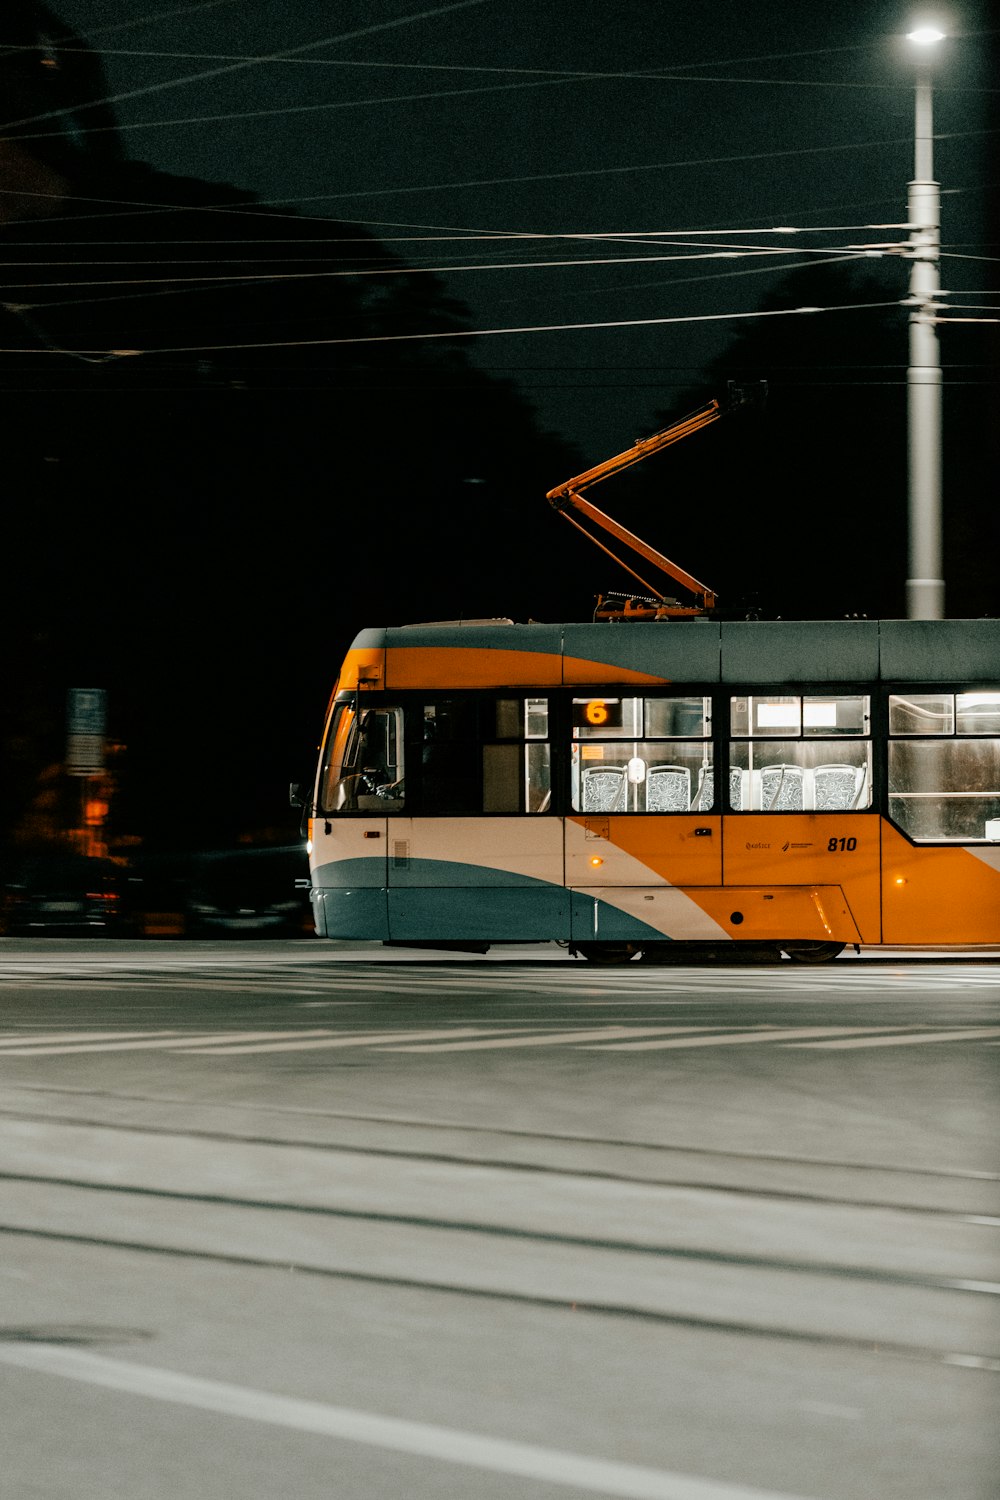 an orange and blue trolley on a city street at night